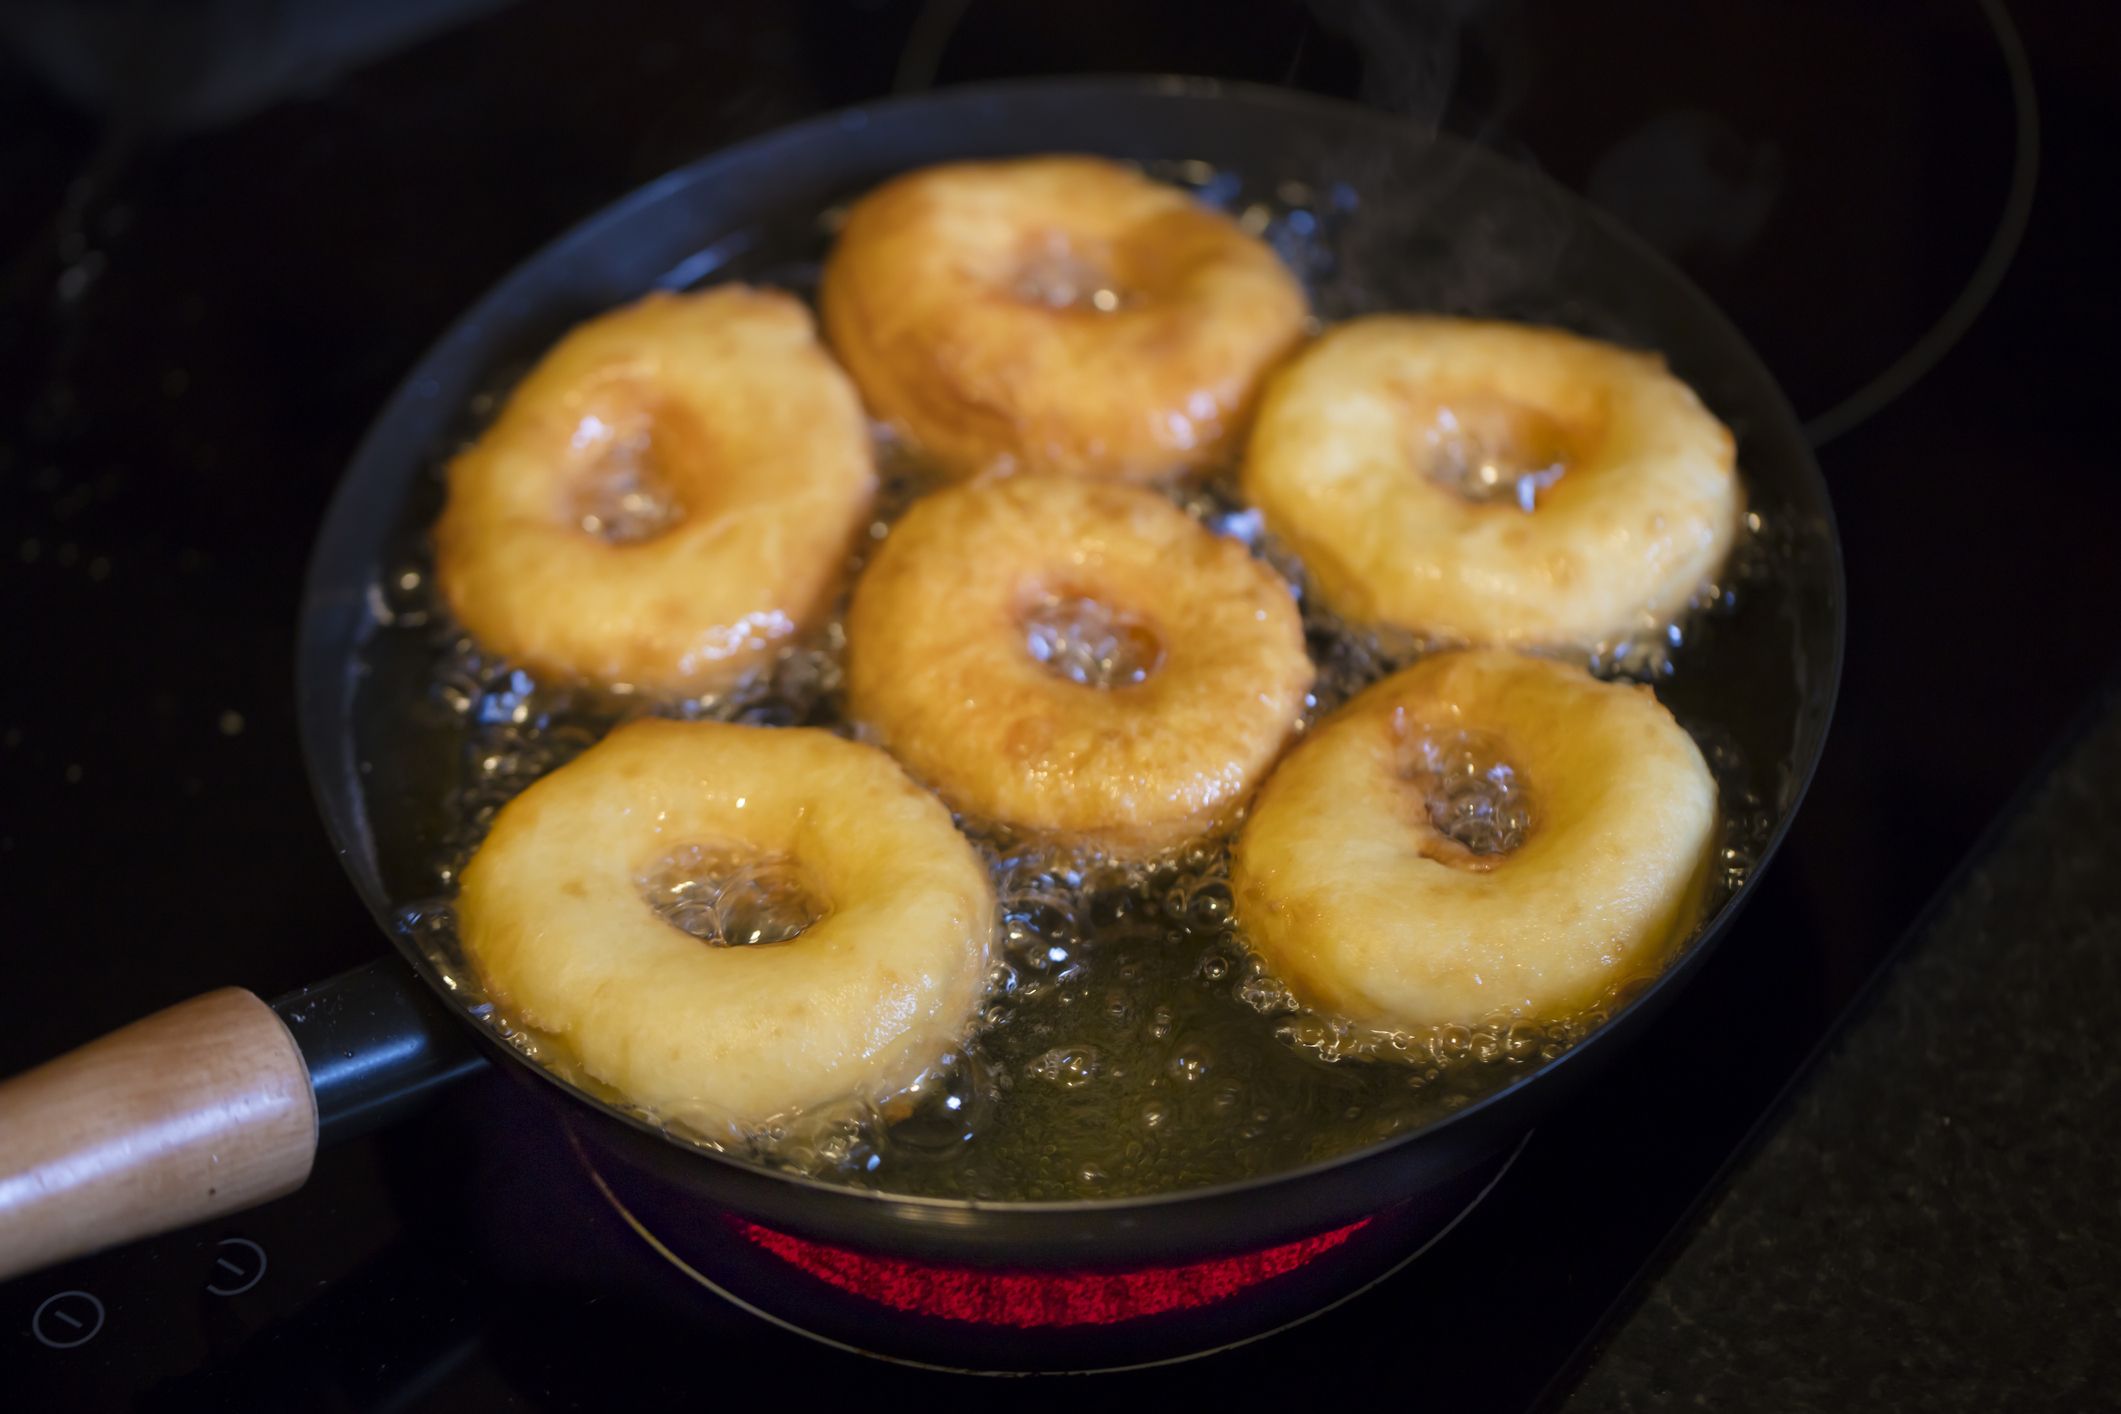 How to check if oil is ready for frying if you don't have a